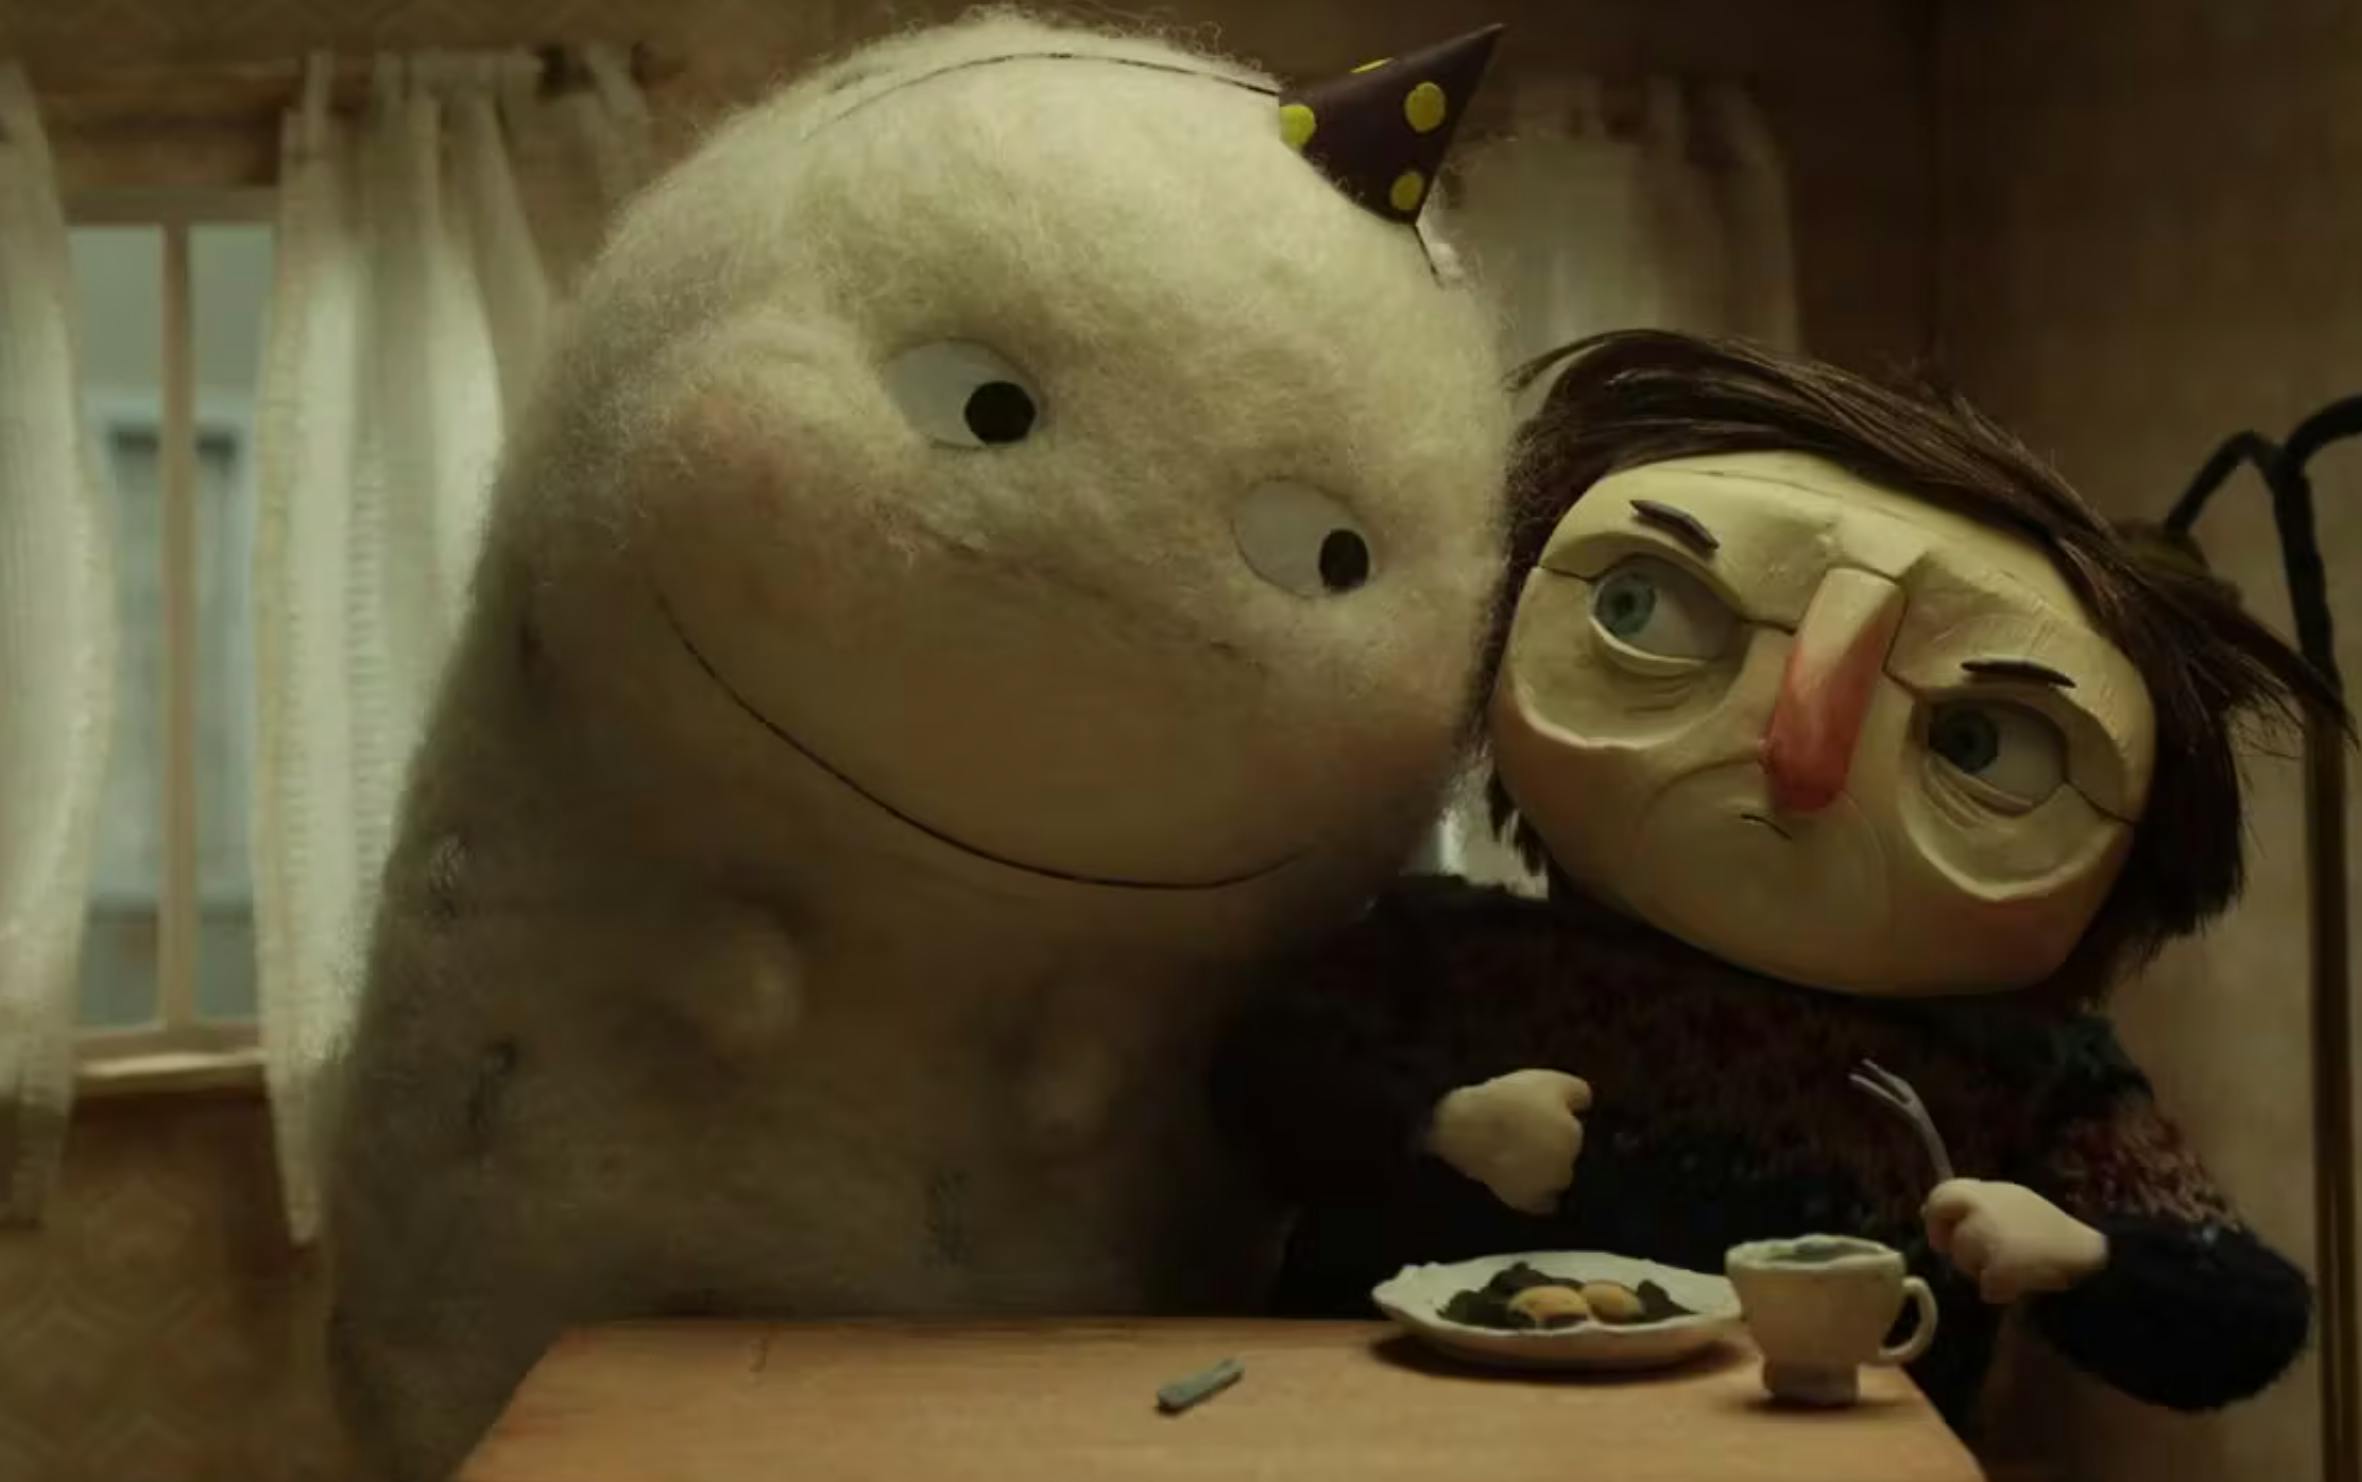 screenshot from but milk is more important (2012). A large white felted character wearing a birthday hat is looking at a human with short hair, a sweater, and is holding a fork. The human looks annoyed at the white blob character. 